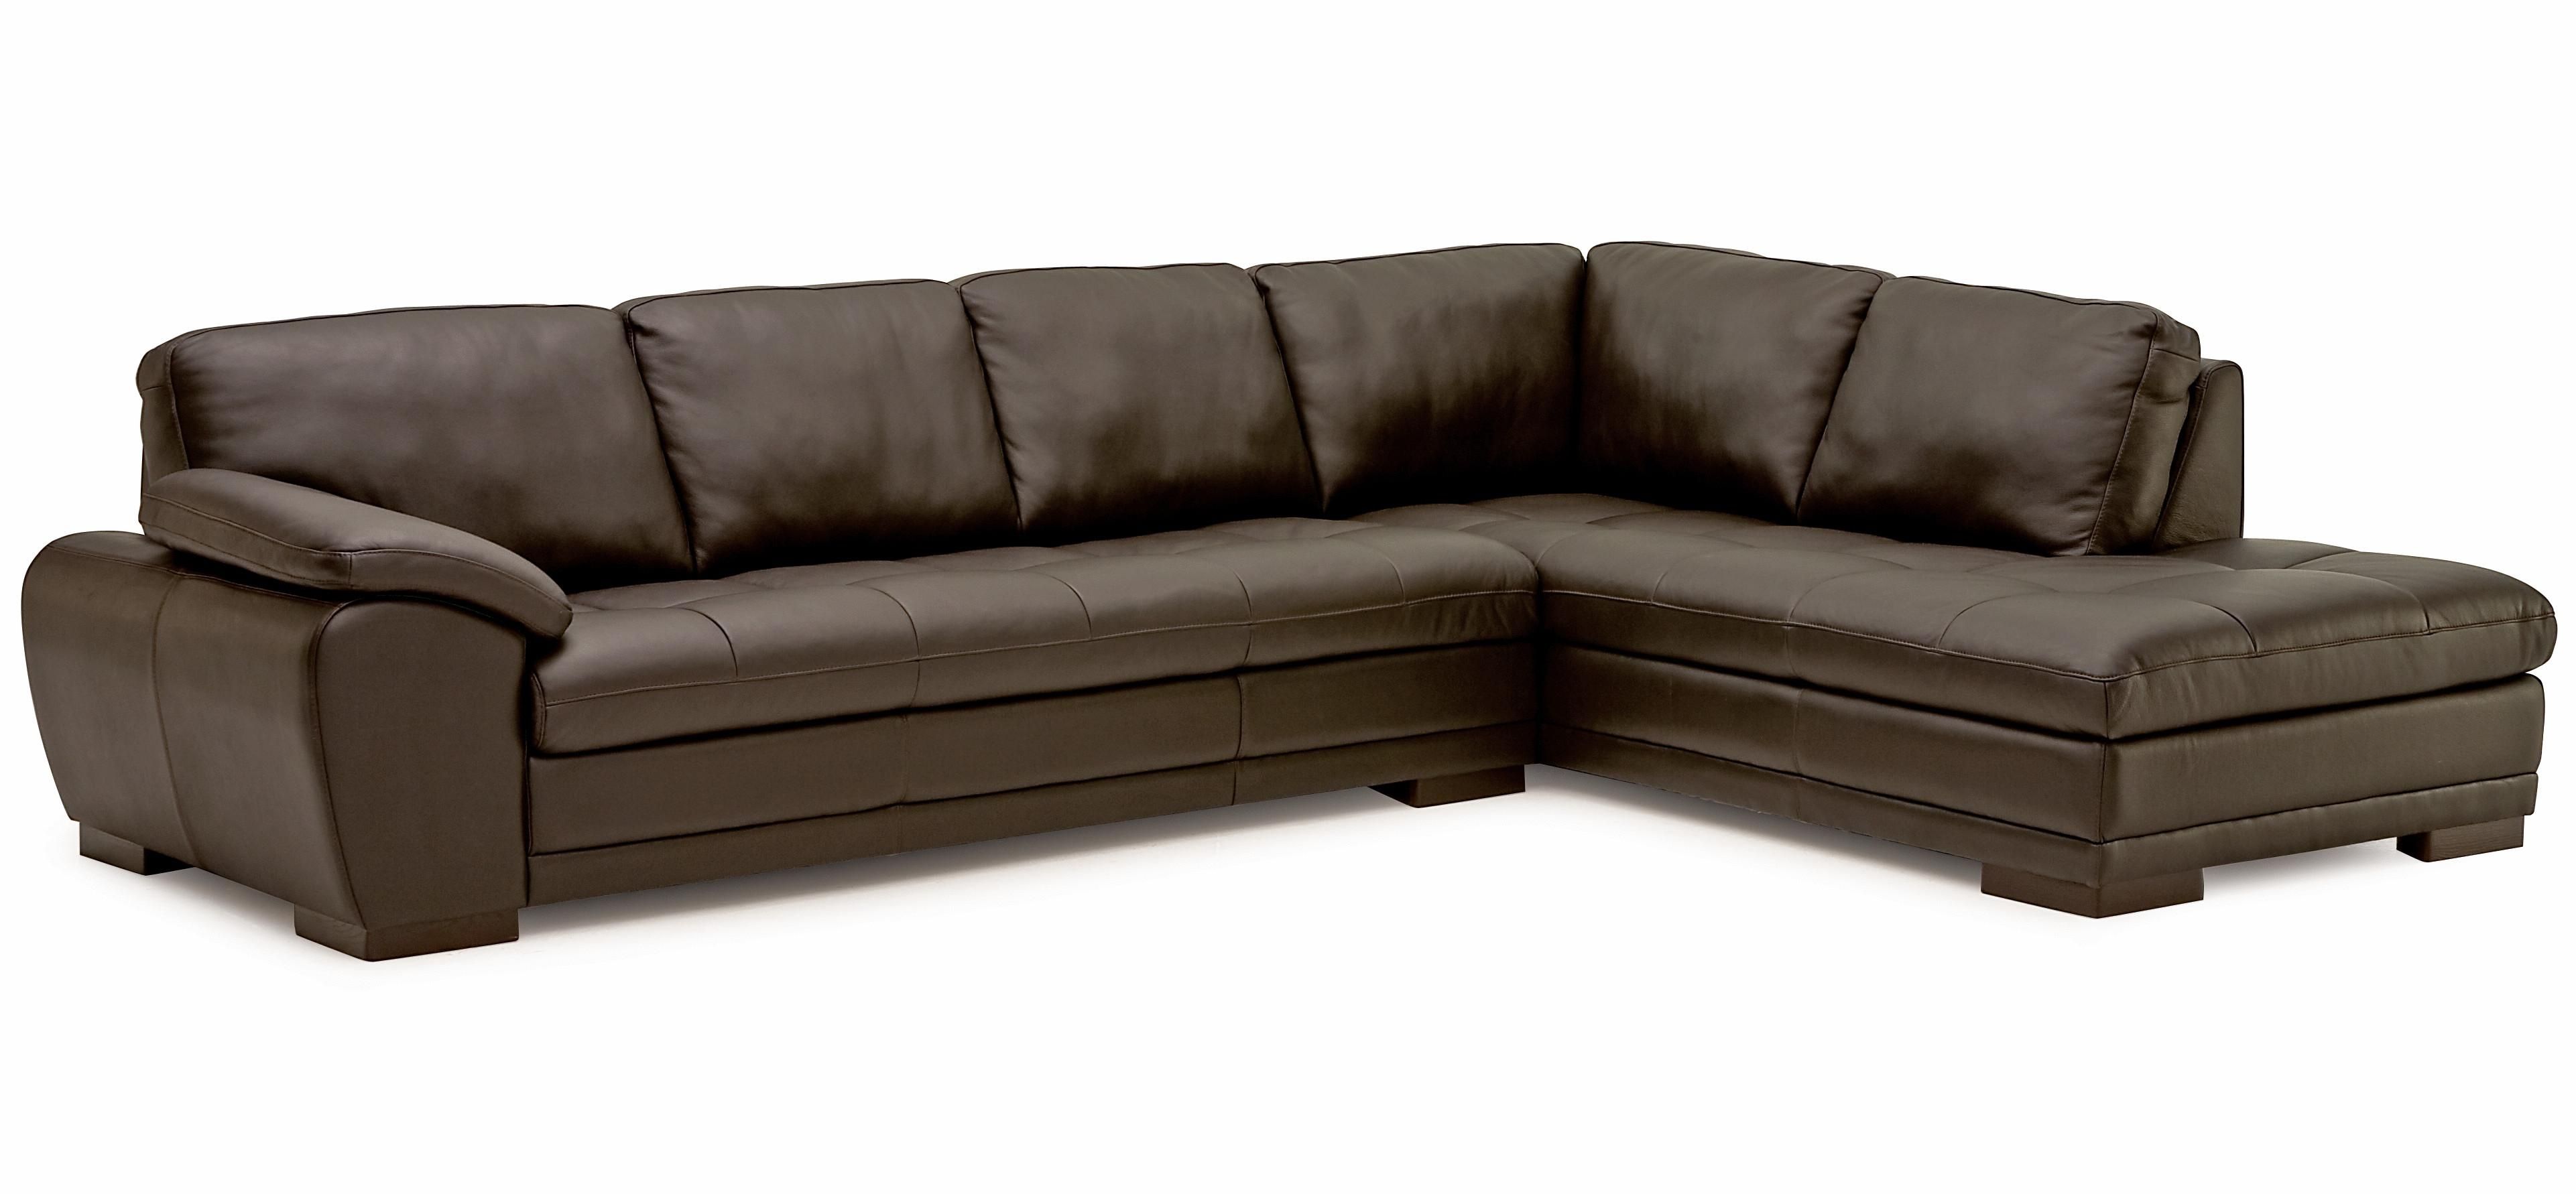 Palliser Miami Contemporary 2 Piece Sectional Sofa With Right Facing With Regard To Miami Sectional Sofas (Photo 3 of 10)